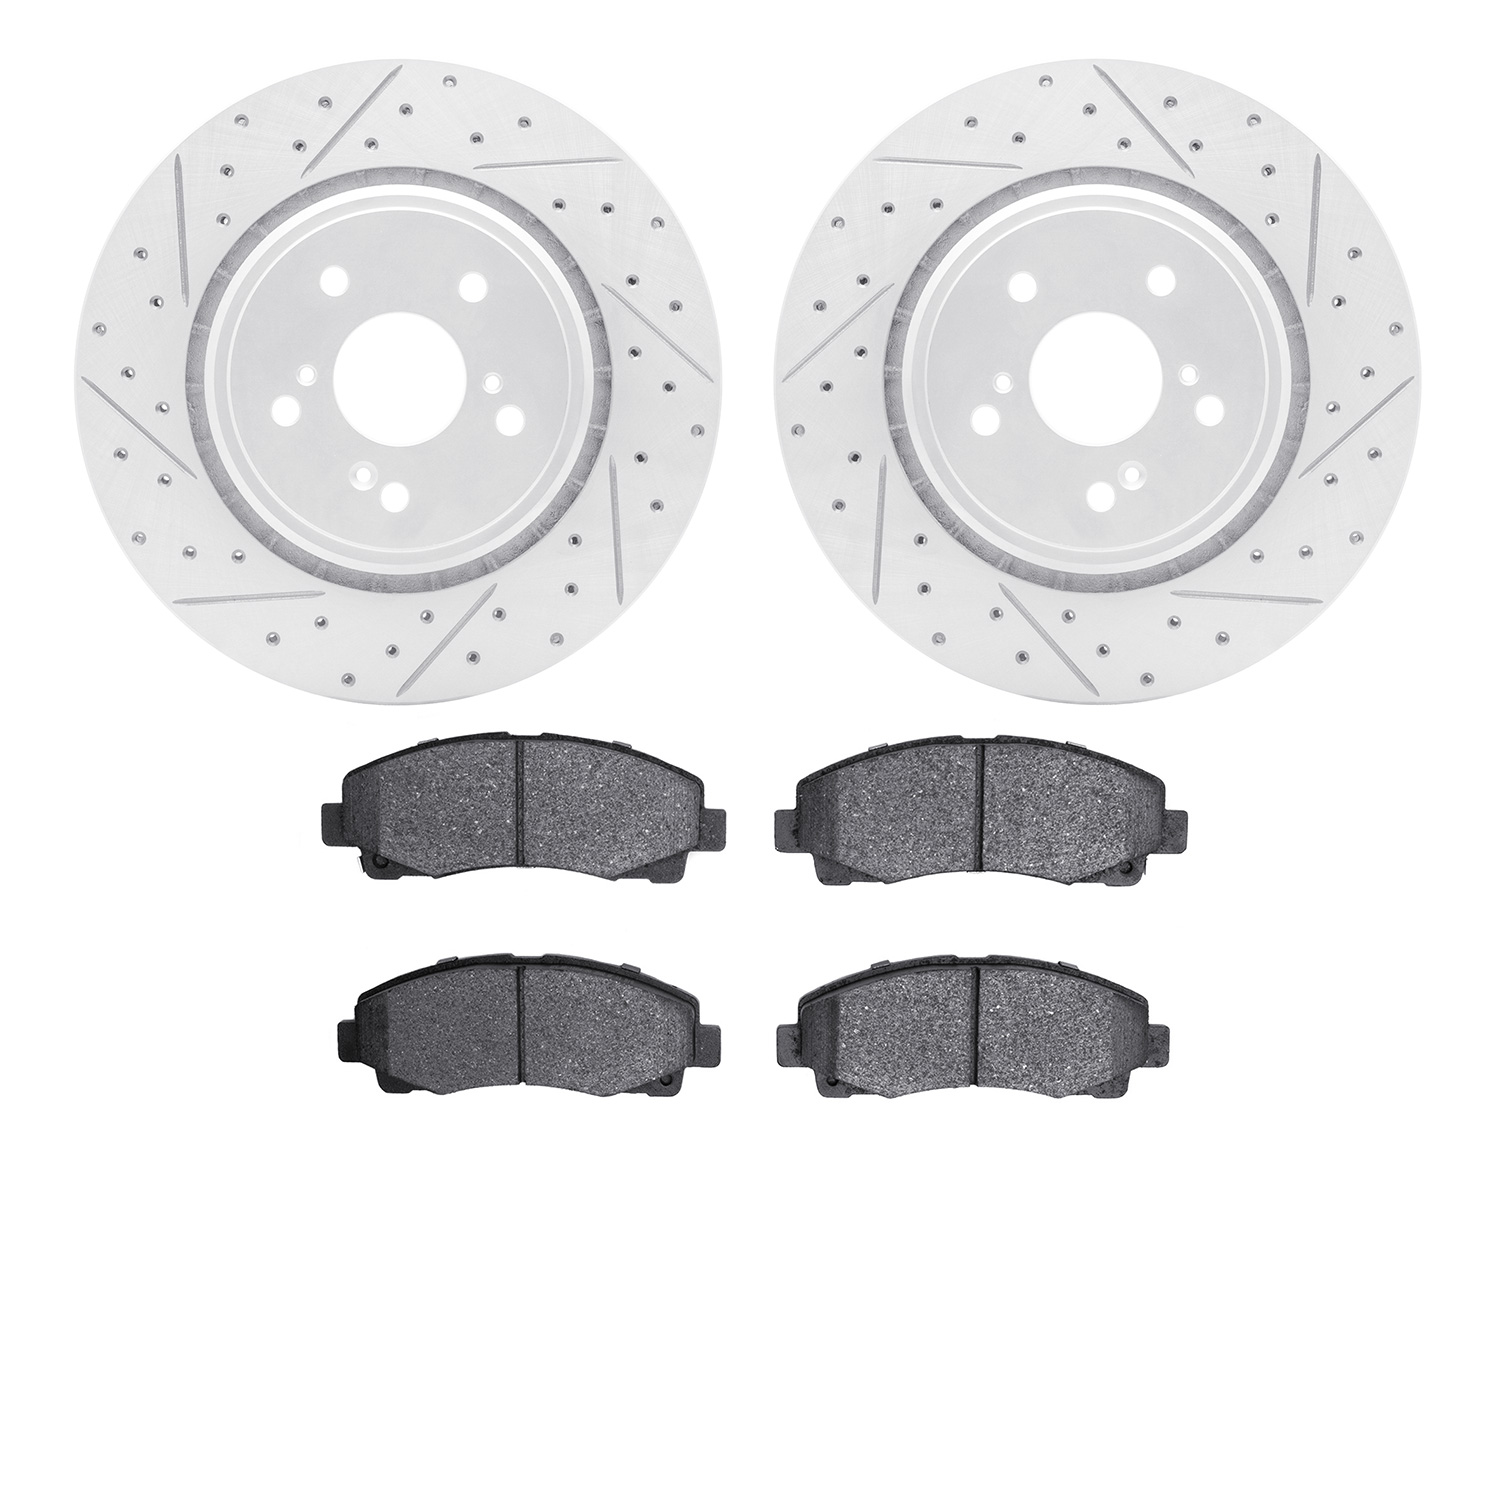 2502-58021 Geoperformance Drilled/Slotted Rotors w/5000 Advanced Brake Pads Kit, 2015-2020 Acura/Honda, Position: Front